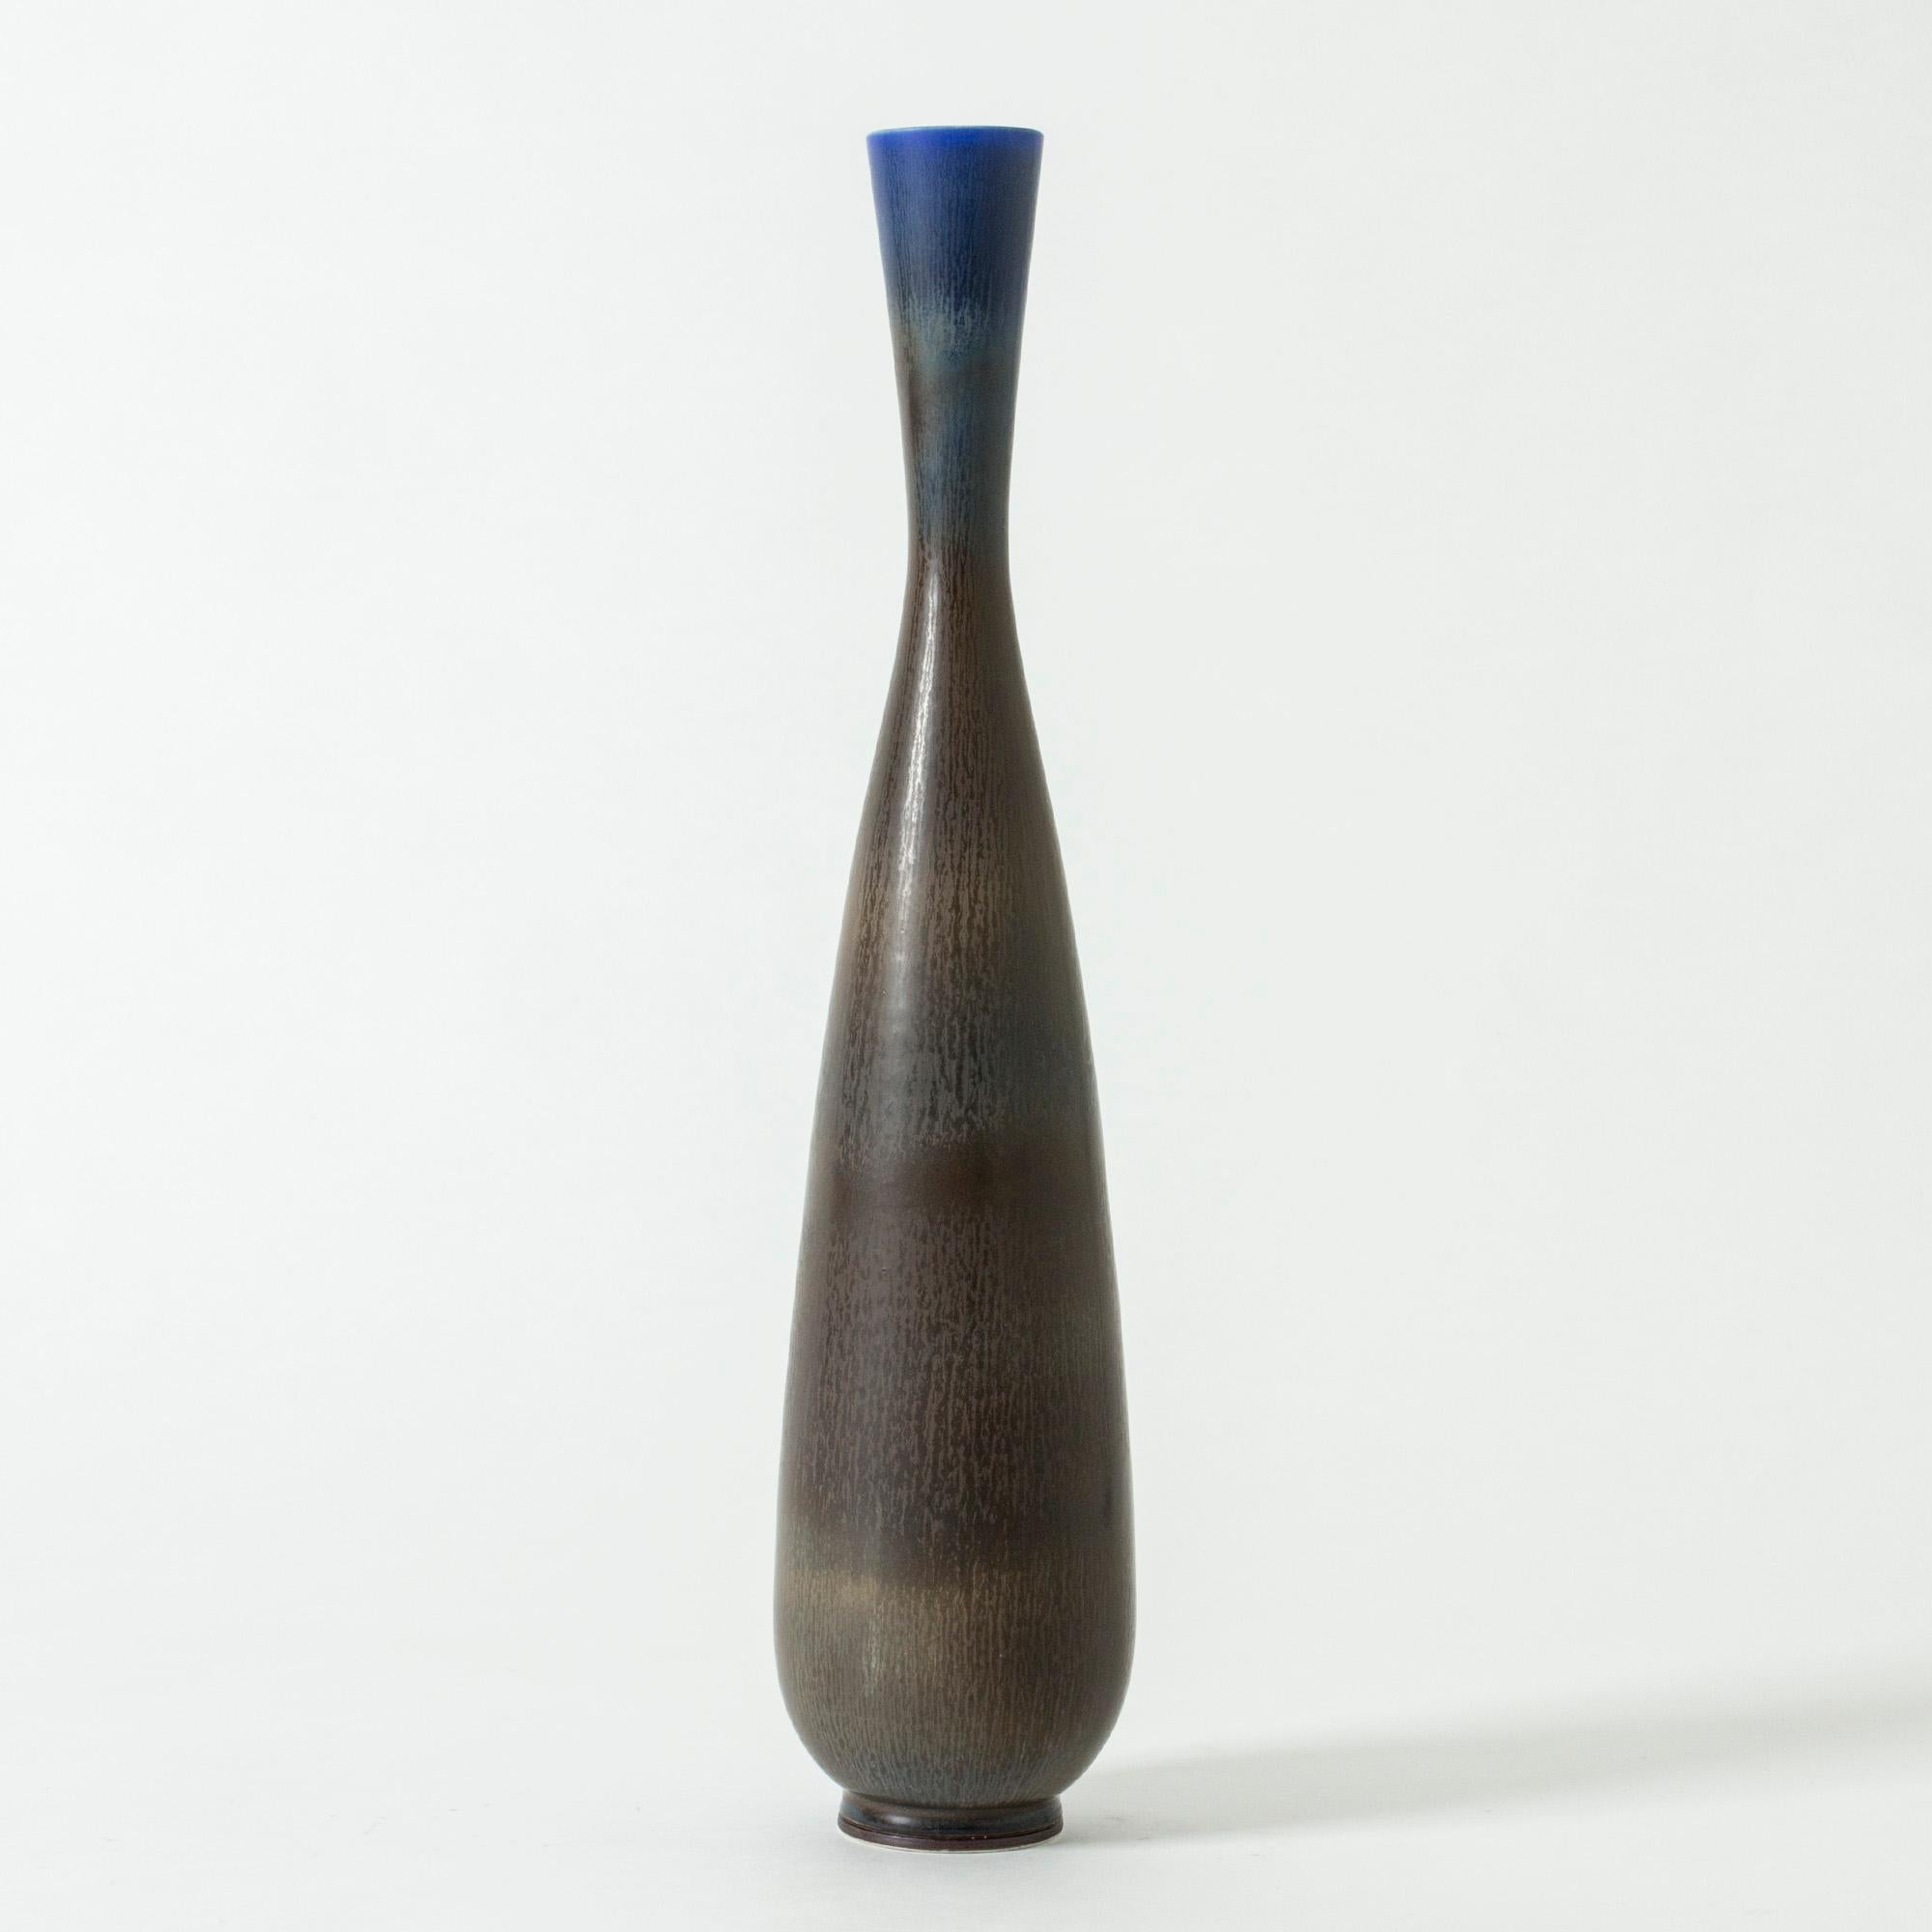 Exceptional stoneware vase by Berndt Friberg, in a rare, large size. Exquisite brown hare’s fur glaze, blending into vibrant blue at the rim.